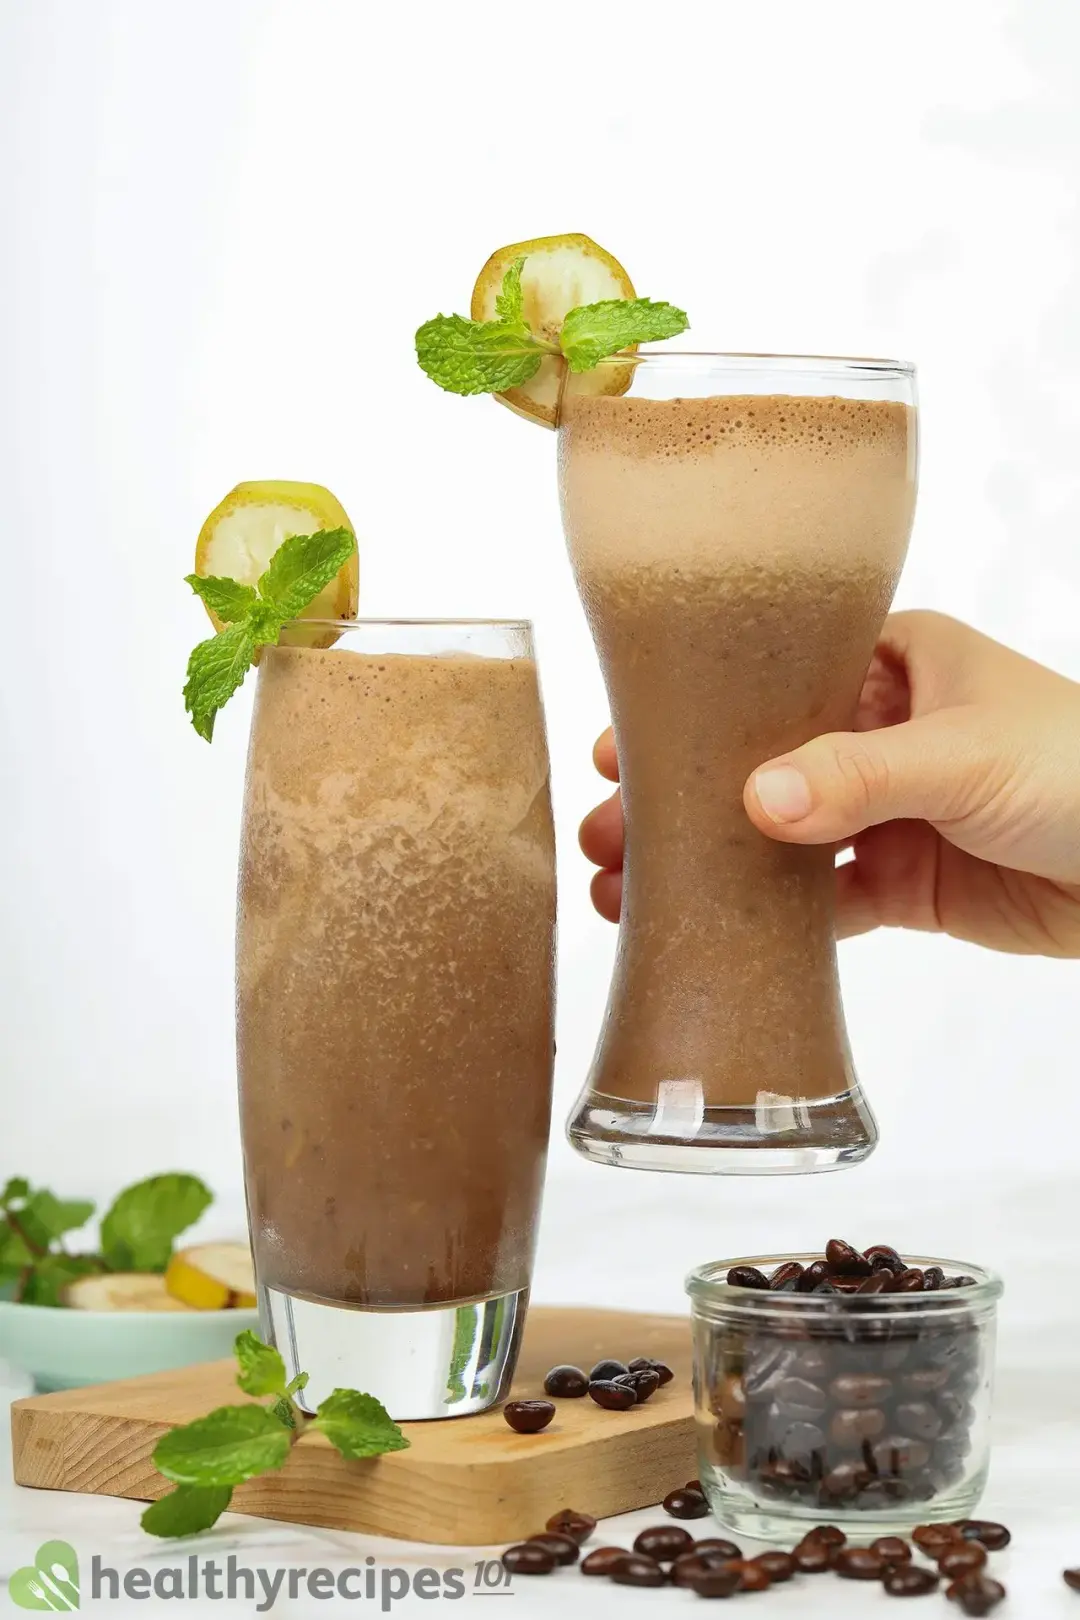 Storing the Ingredients of coffee banana smoothie